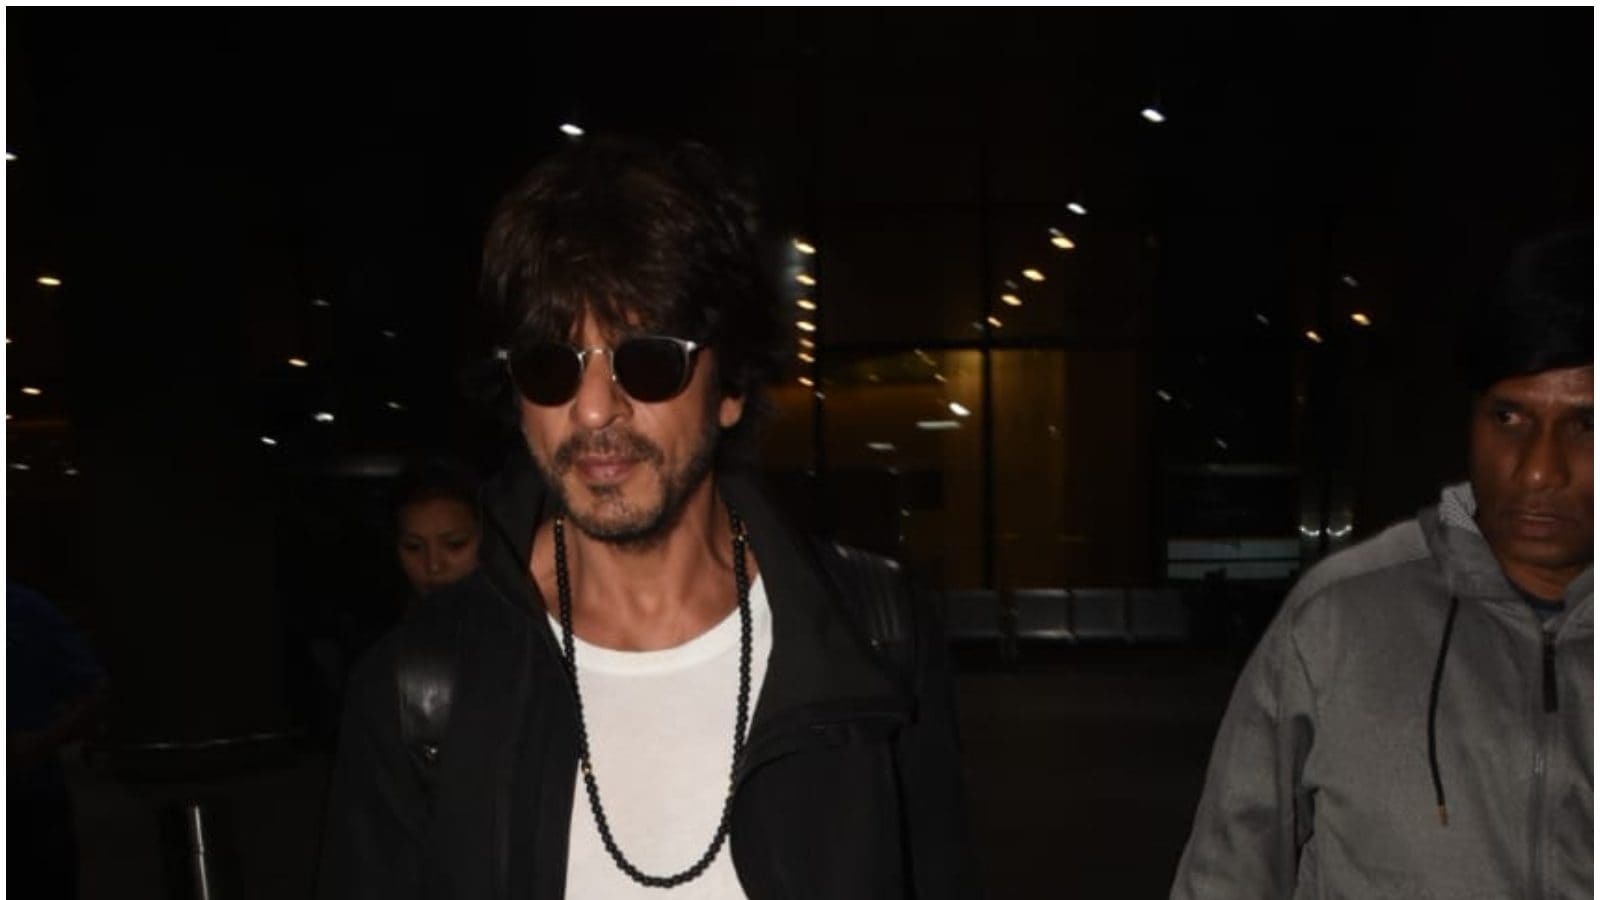 Shah Rukh Khan returns after promoting Pathaan in Dubai, proves